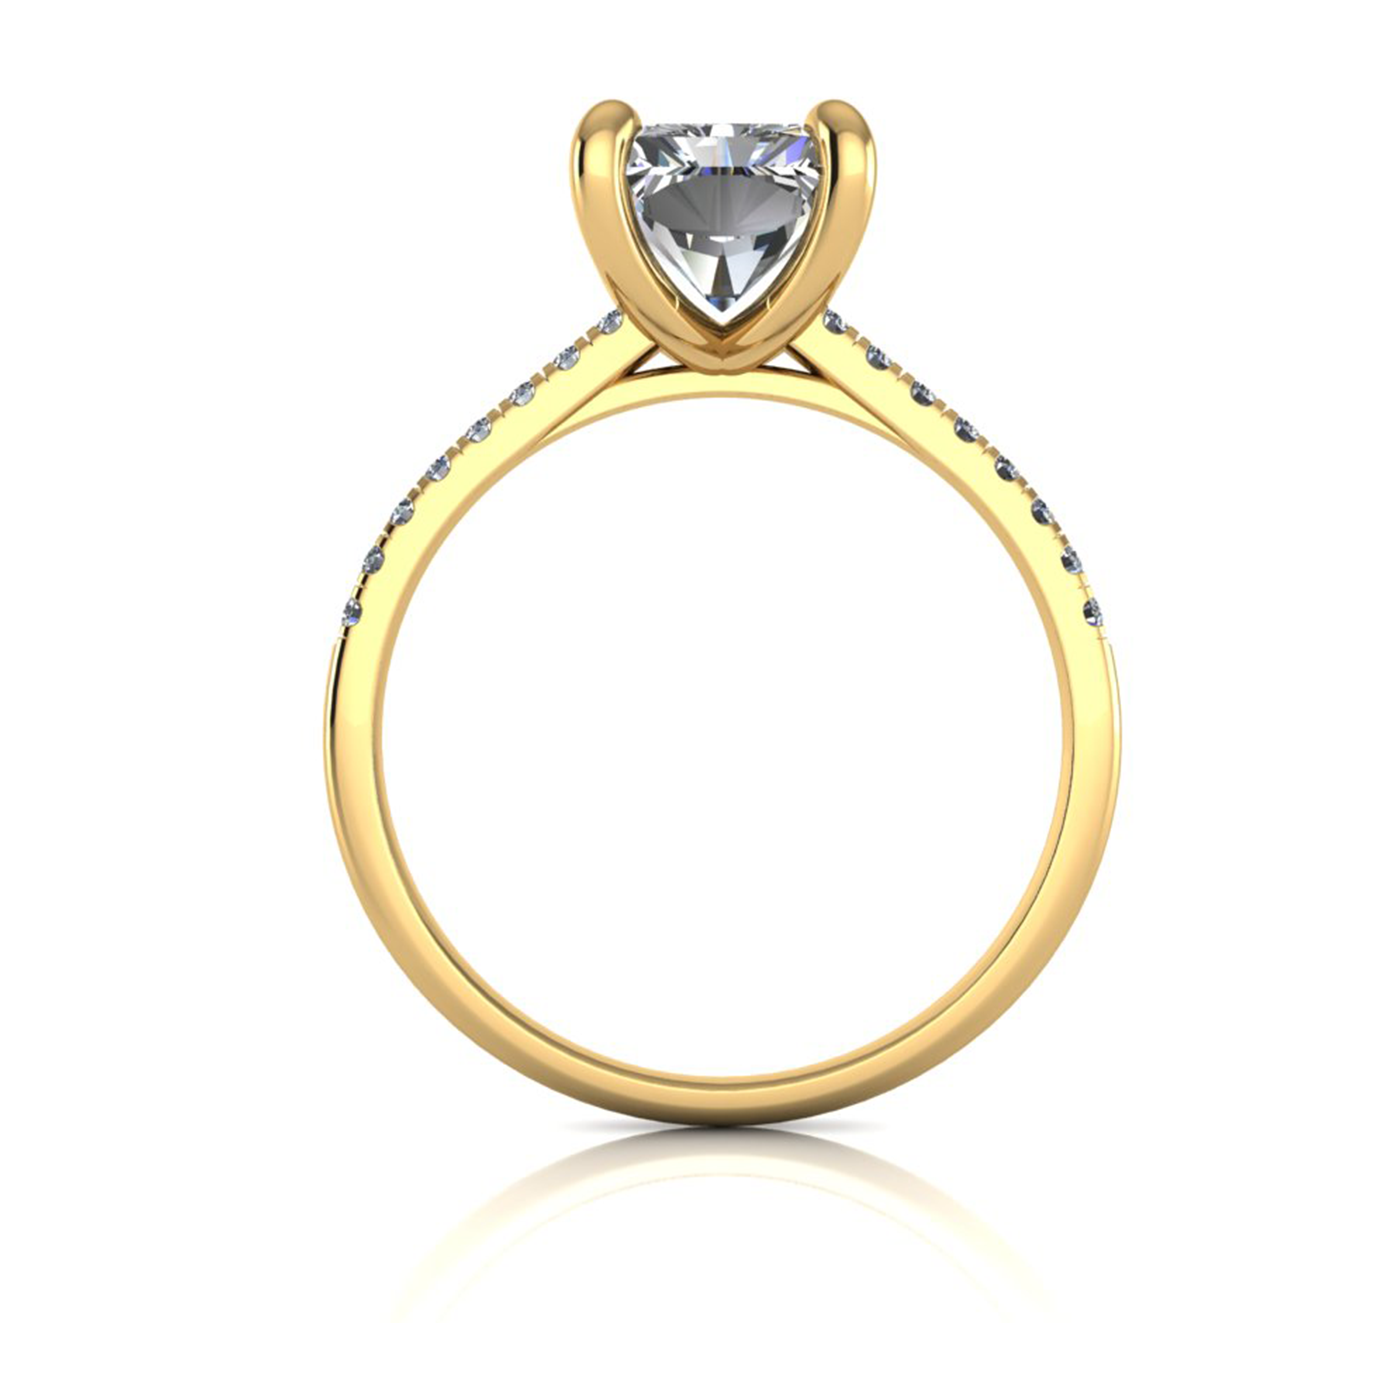 18k yellow gold  2,50 ct 4 prongs radiant cut diamond engagement ring with whisper thin pavÉ set band